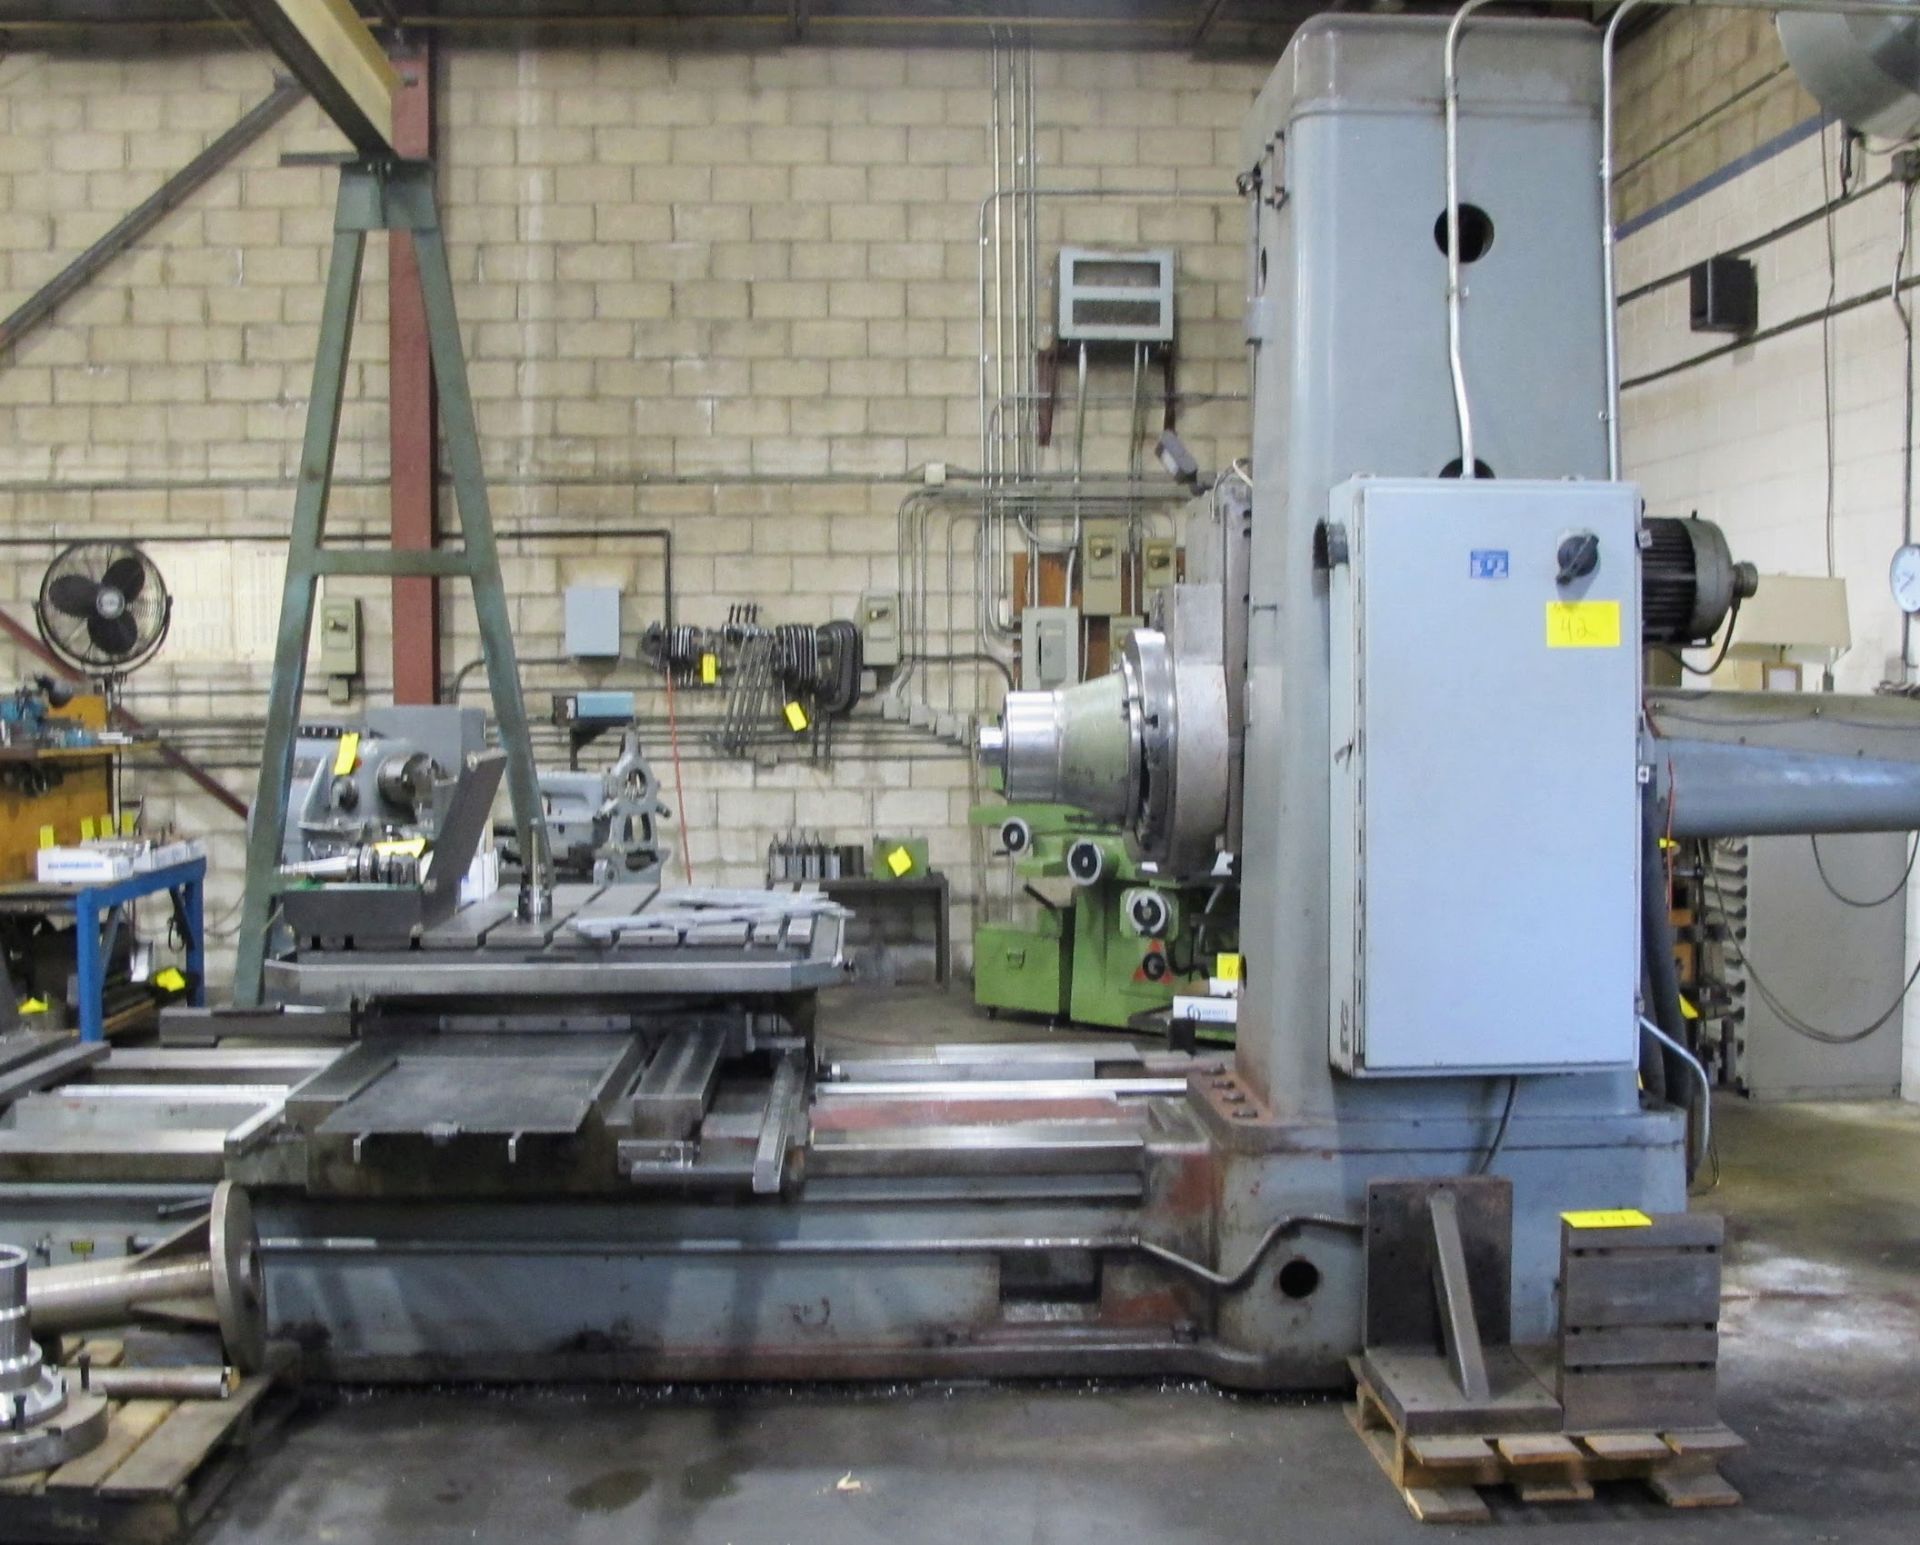 TOS W100 HORIZONTAL BORING MILL, ACU-RITE 4-AXIS DRO, 4" SPINDLE, 14 TO 1,120 RPM, 49" X 49" POWERED - Image 9 of 12